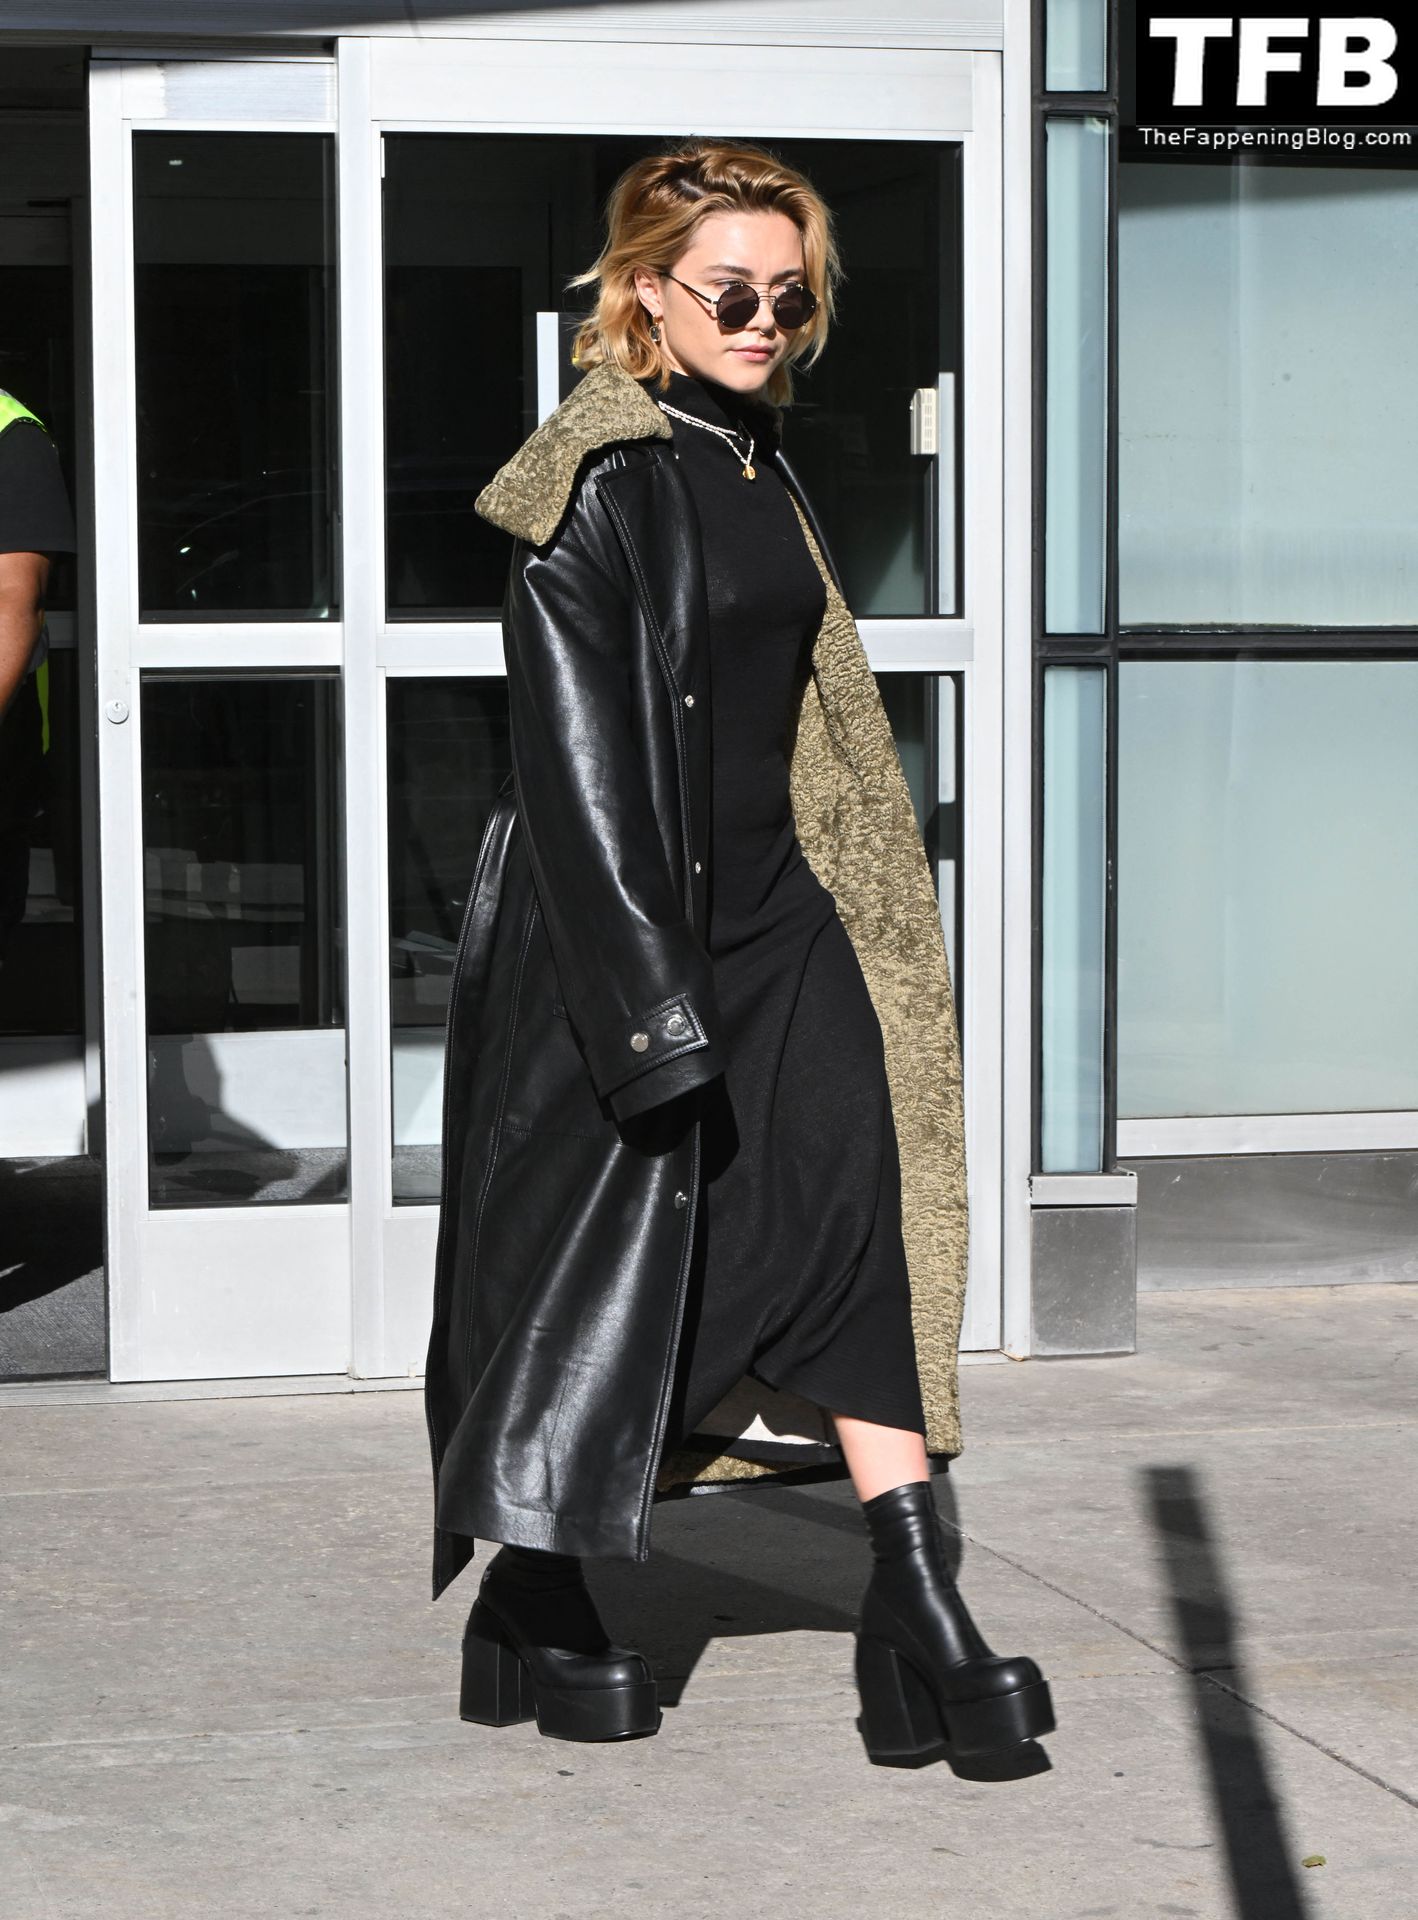 Florence Pugh Pokies The Fappening Blog 6 - Florence Pugh Shows Off Her Pokies at JFK airport in NYC (31 Photos)